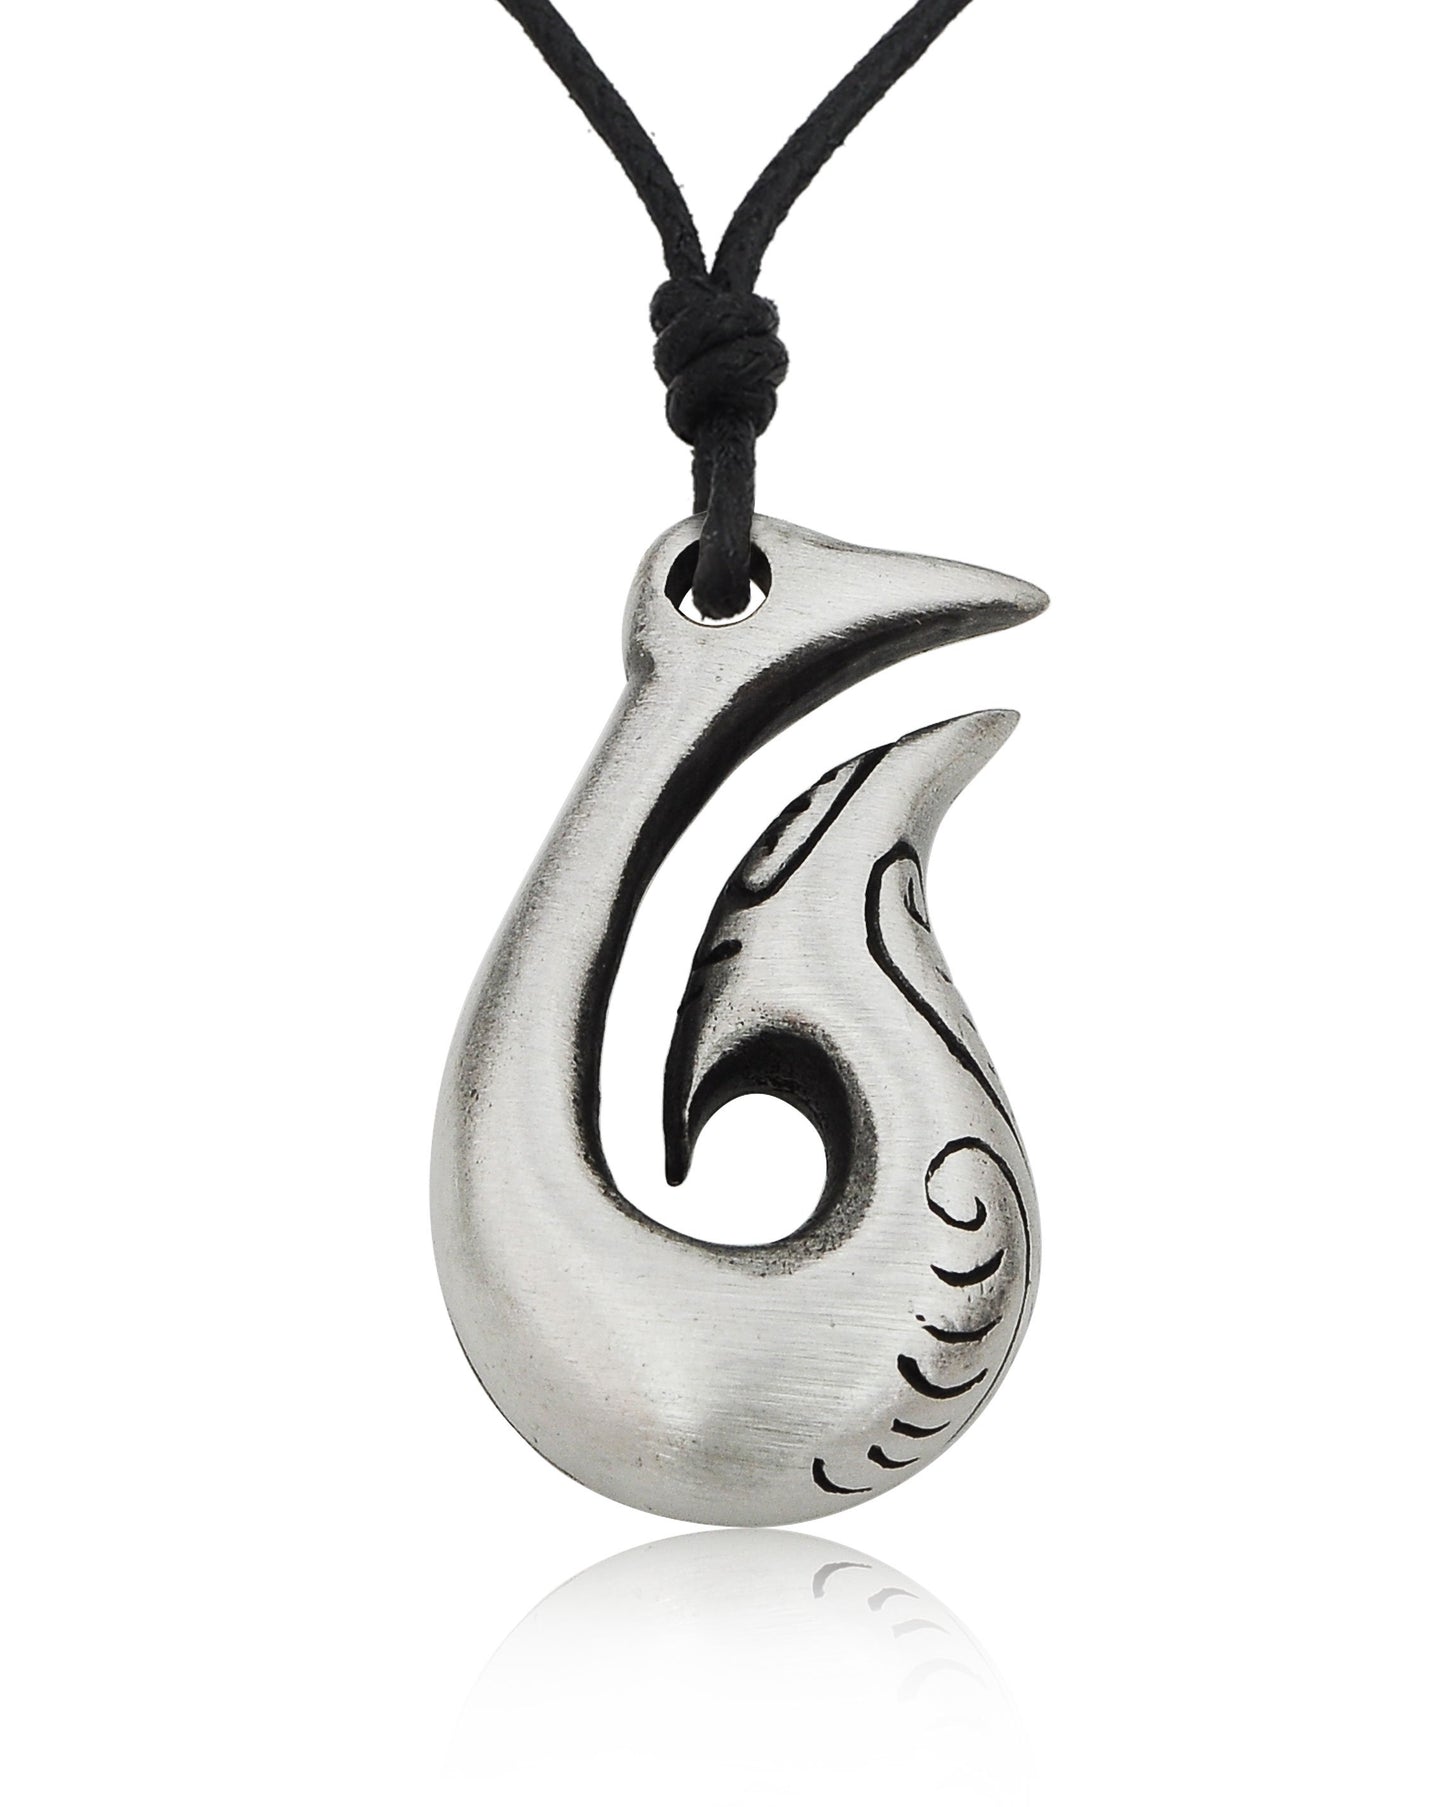 New Tribal Maori Fishing Hook Silver Pewter Charm Necklace Pendant Jewelry